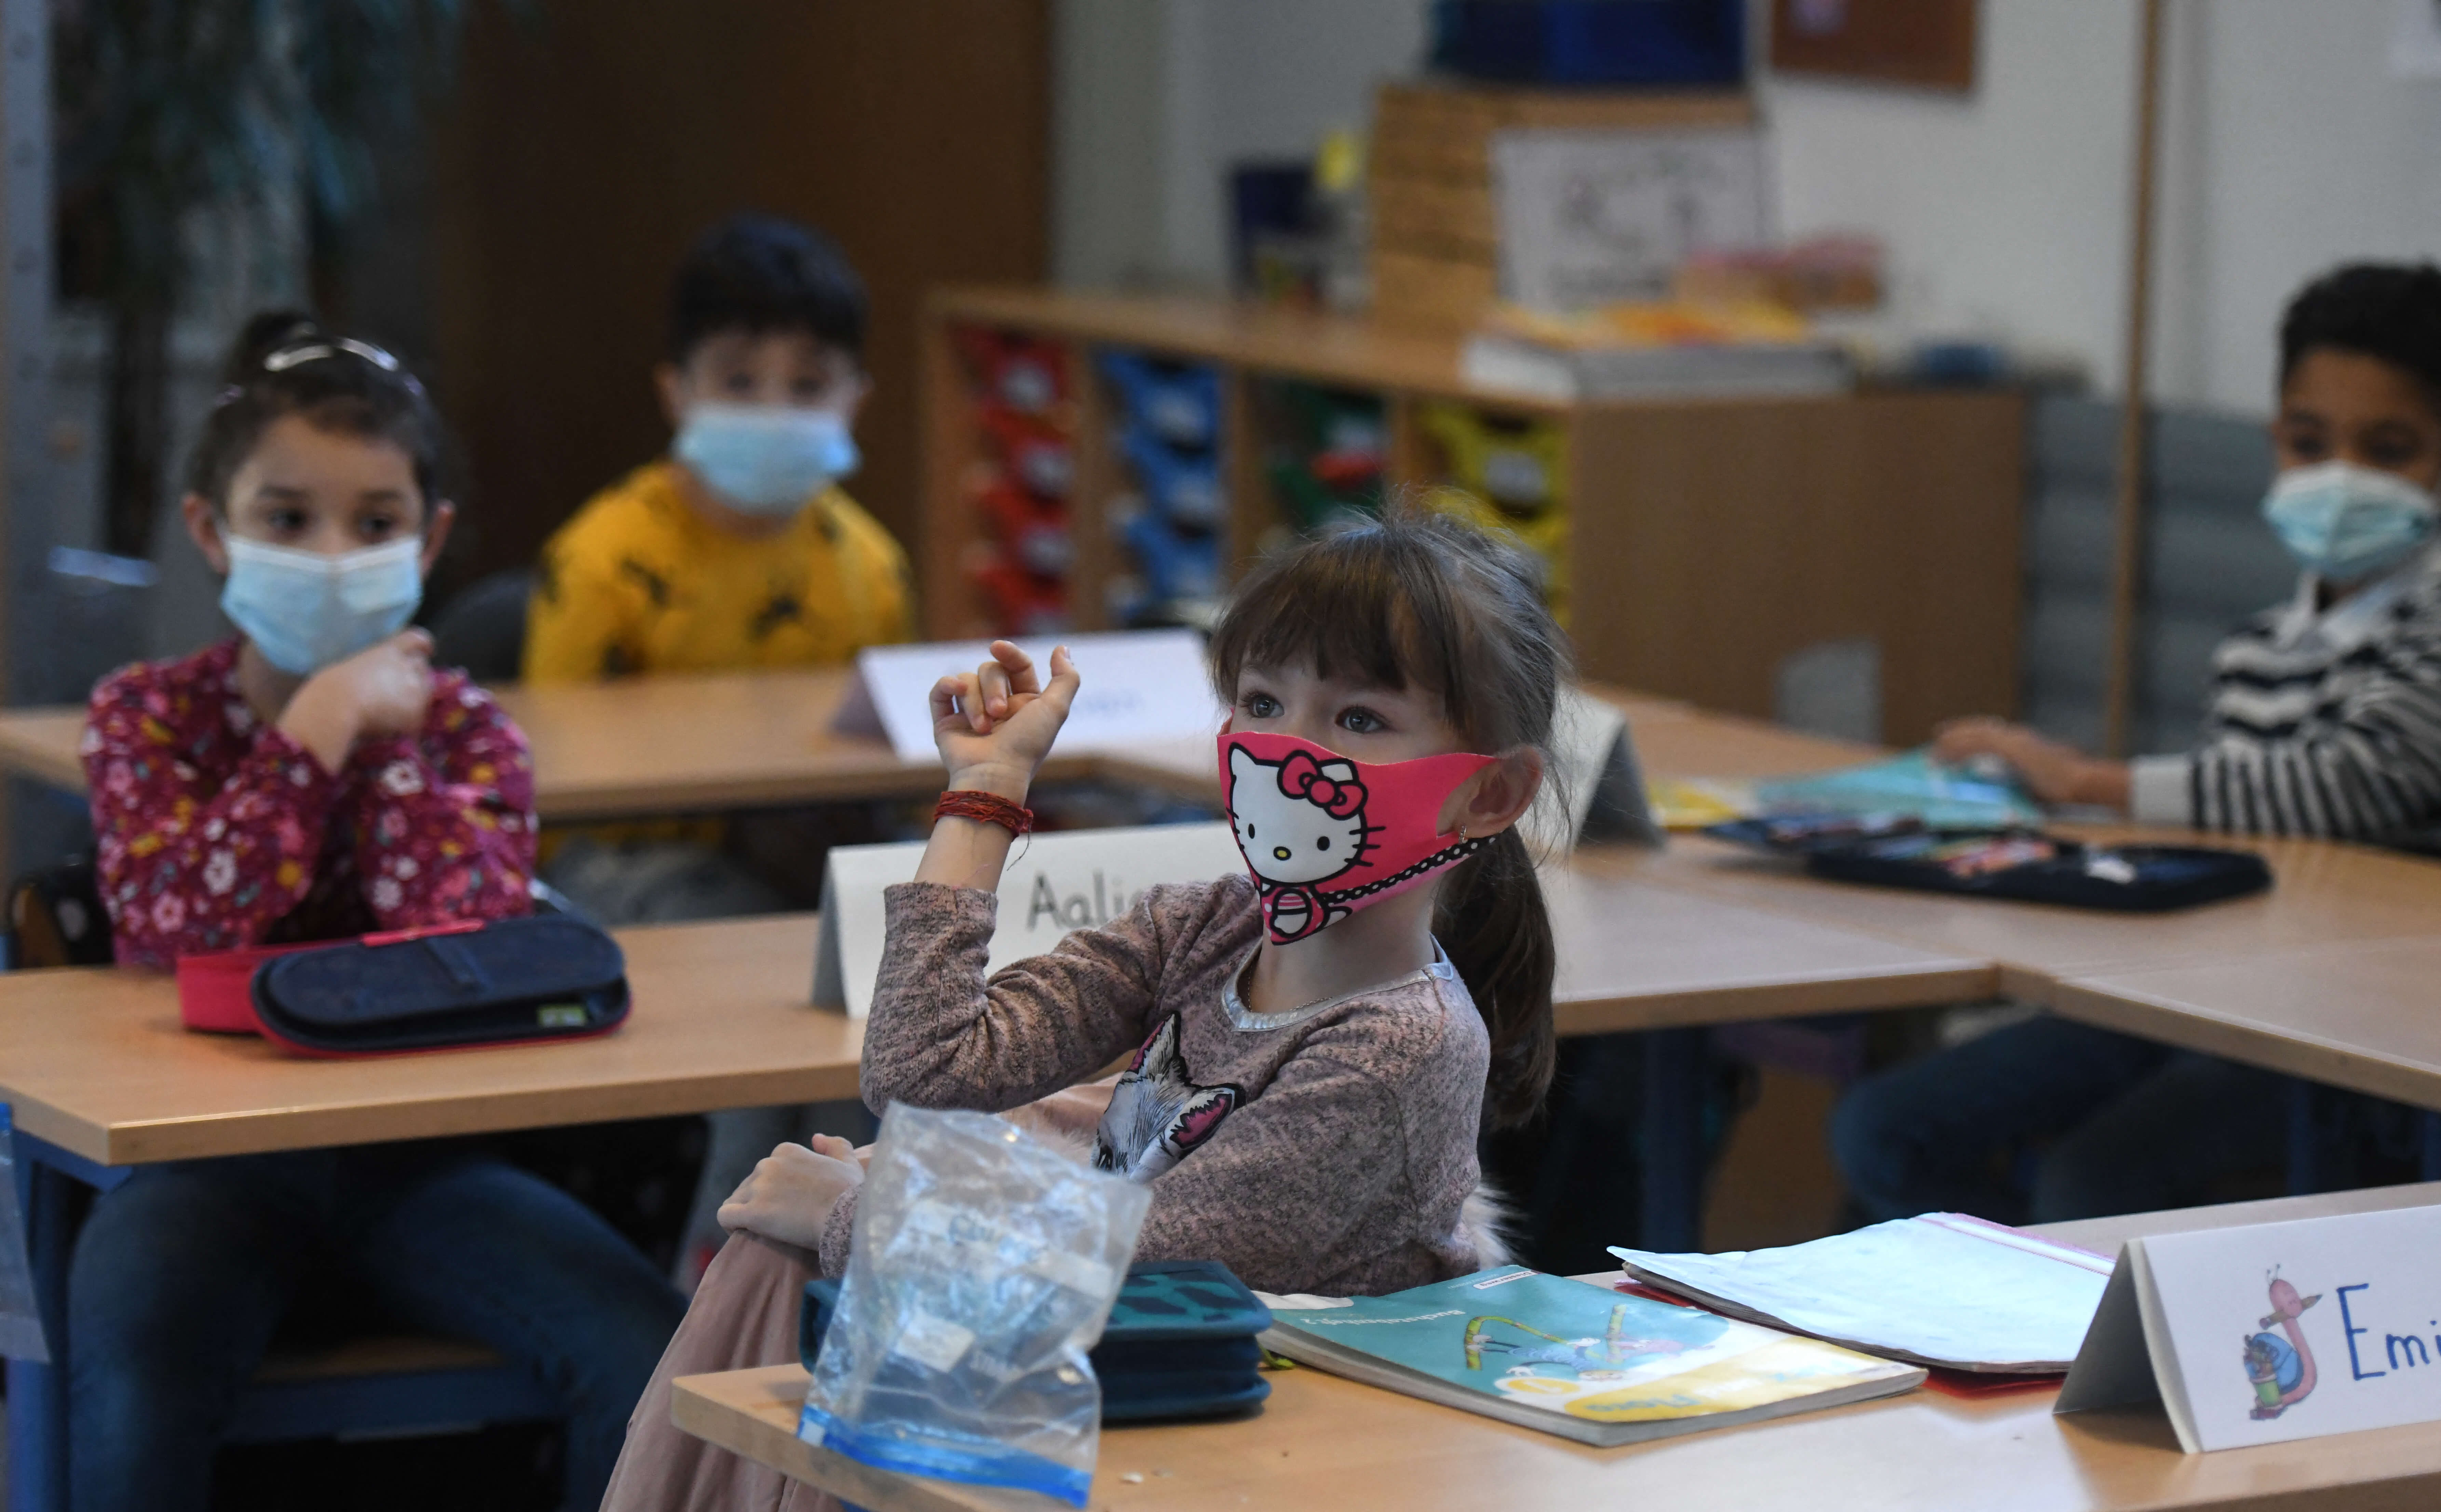 German schools and kindergartens reopen for the first time in two months